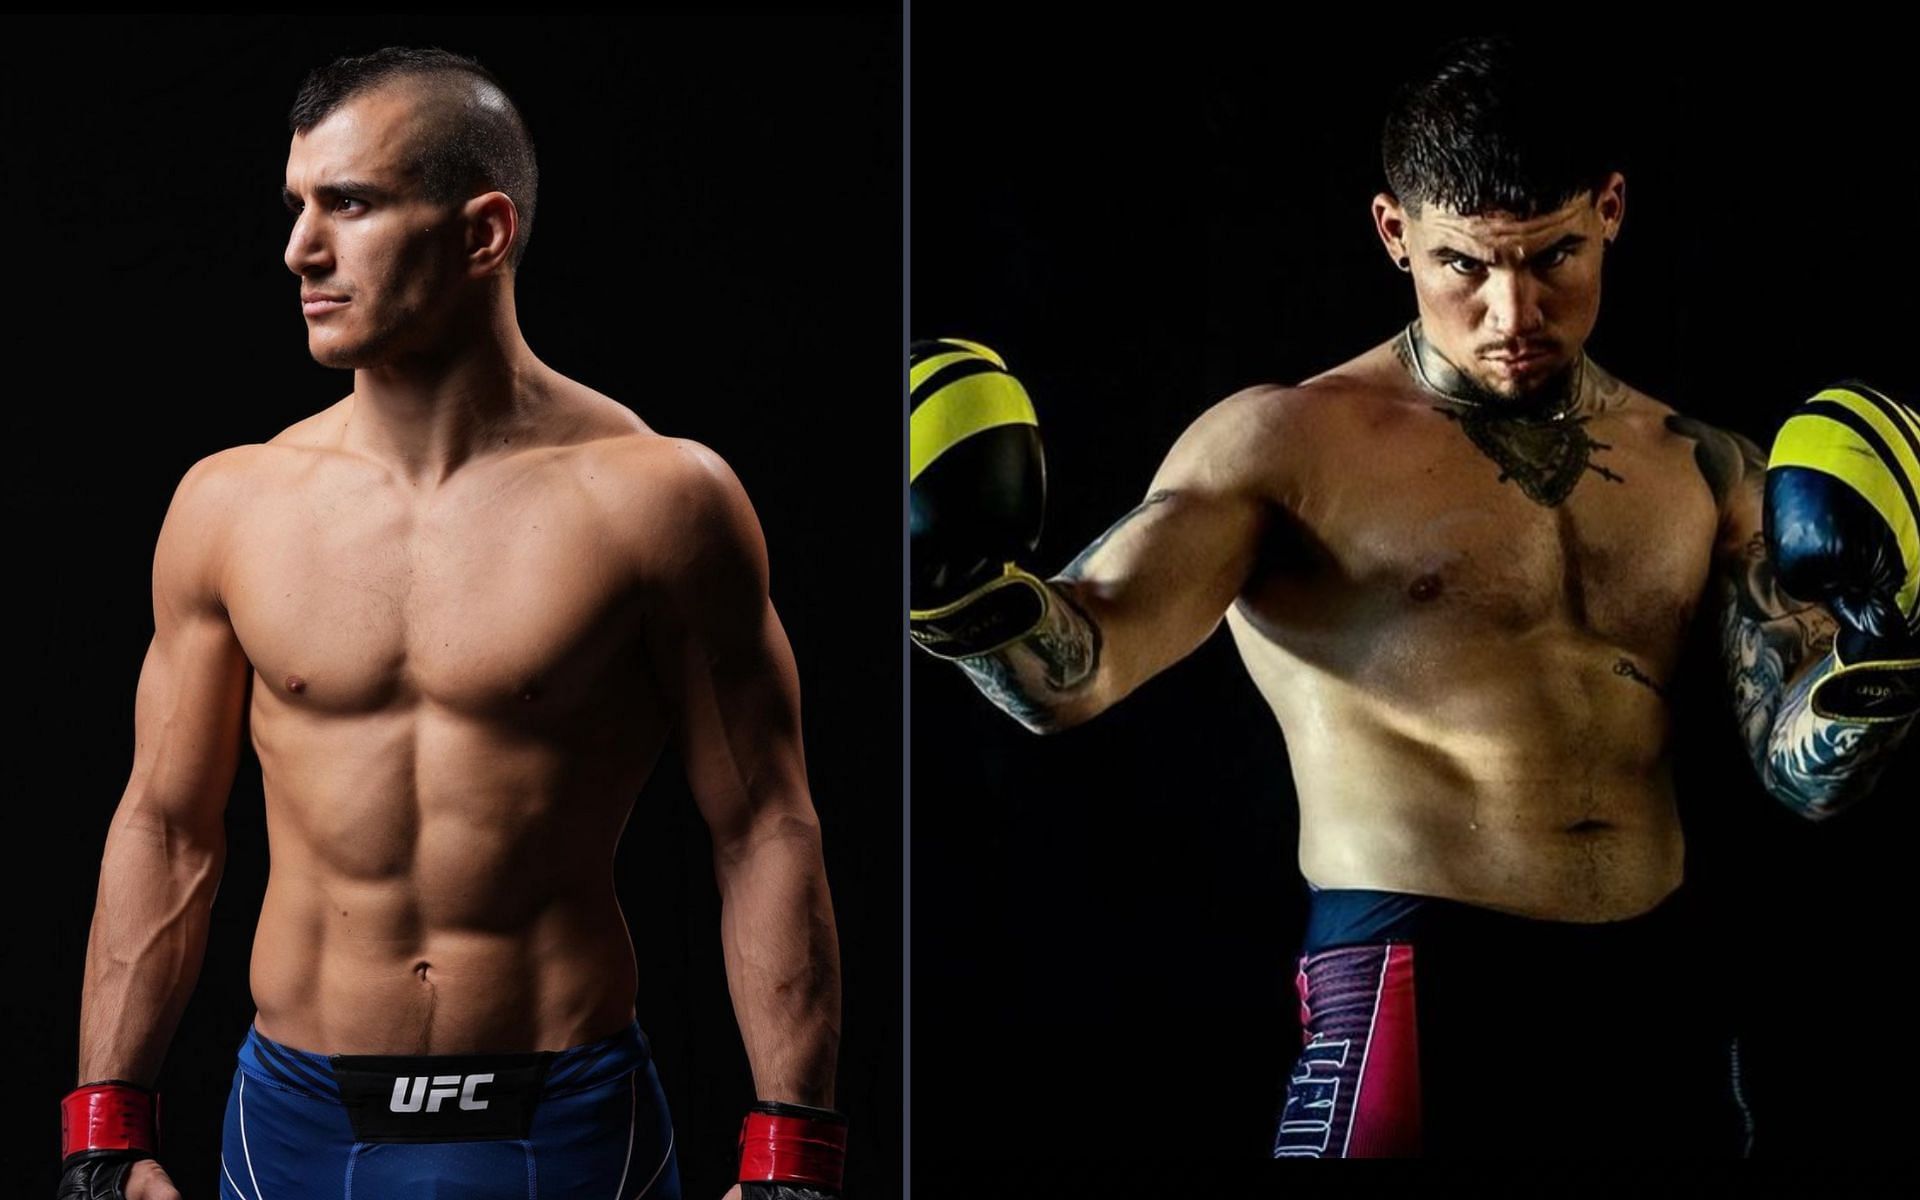 Natan Levy [Left] Pete Rodriguez [Right] [Images courtesy: @natan_levy and @deadgame.mma (Twitter)]